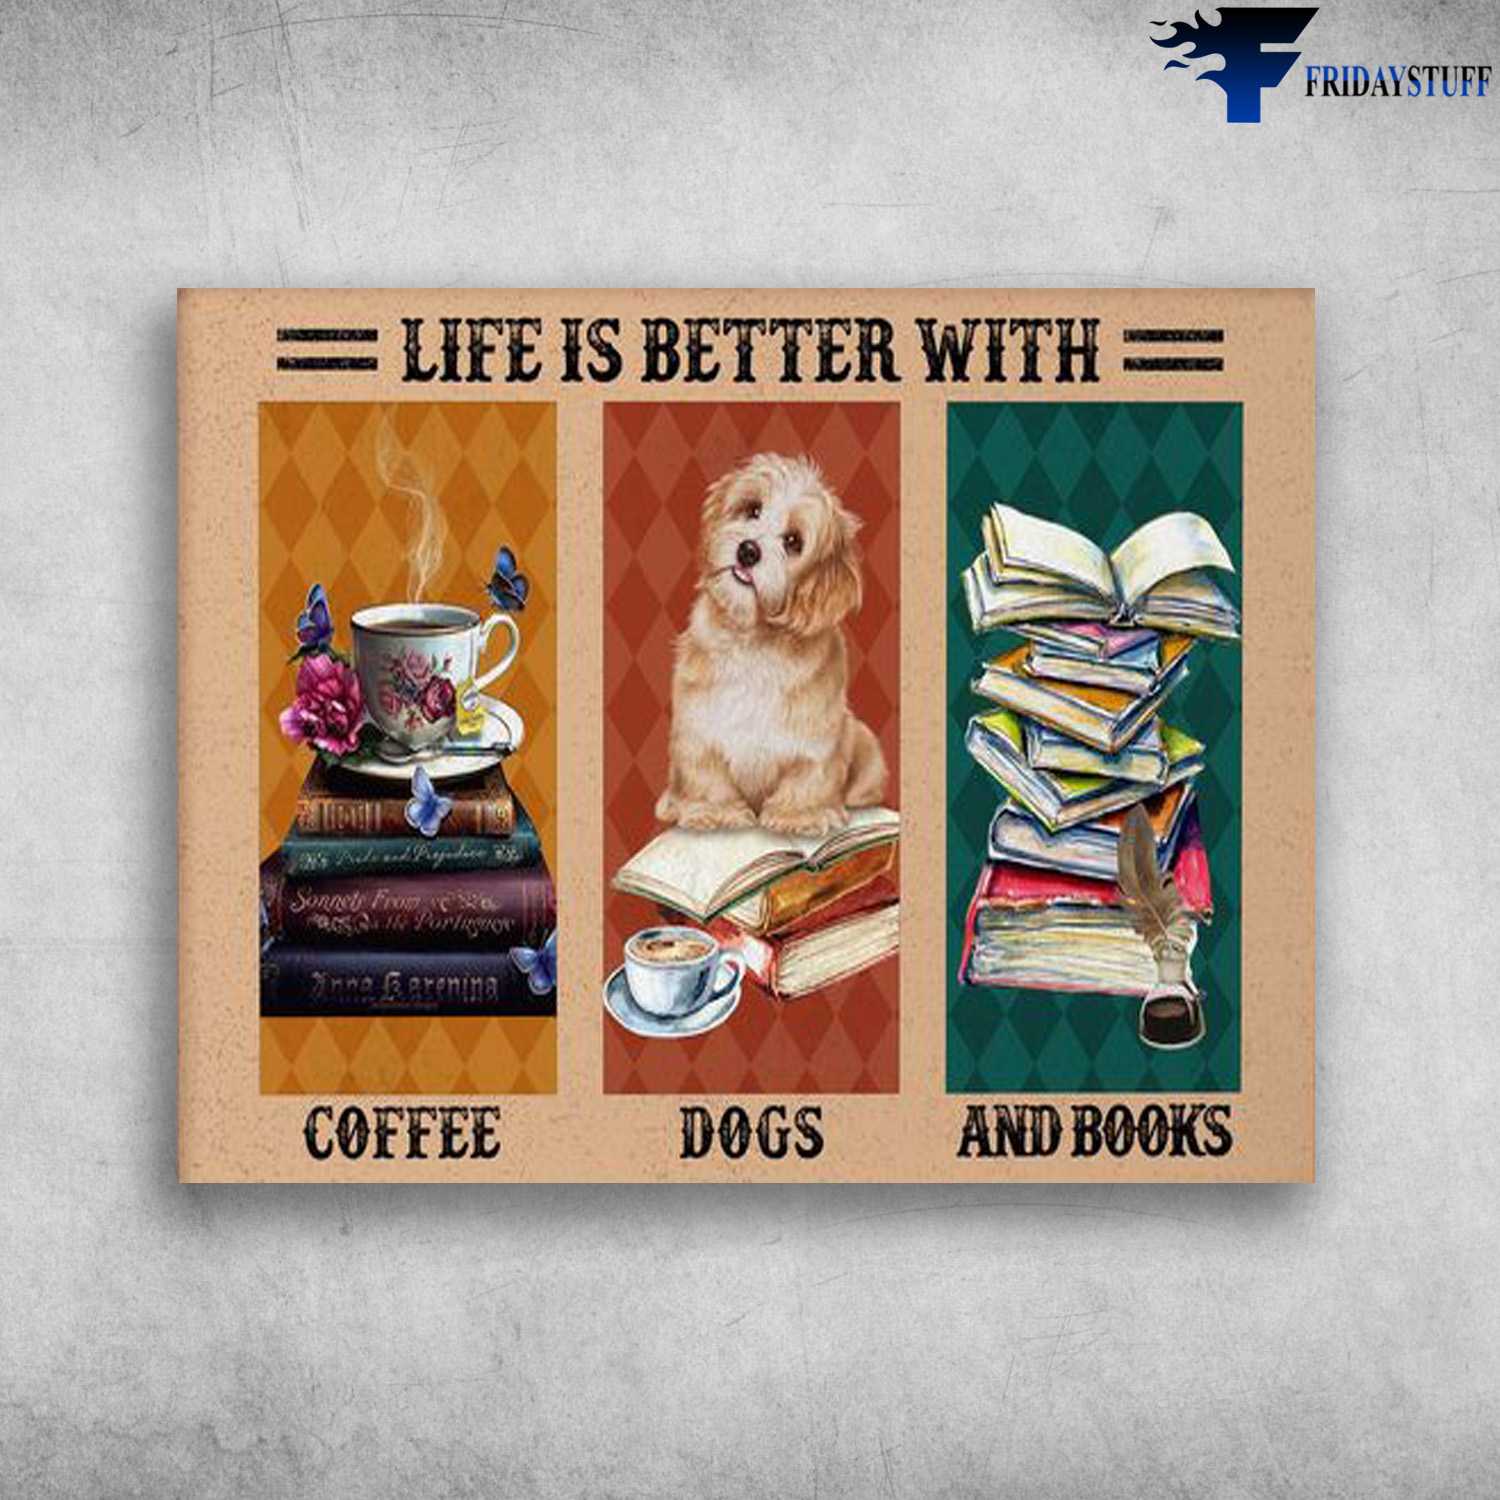 Dog And Coffee, Book Lovers, Life Is Better With, Coffee, Dogs, And Books